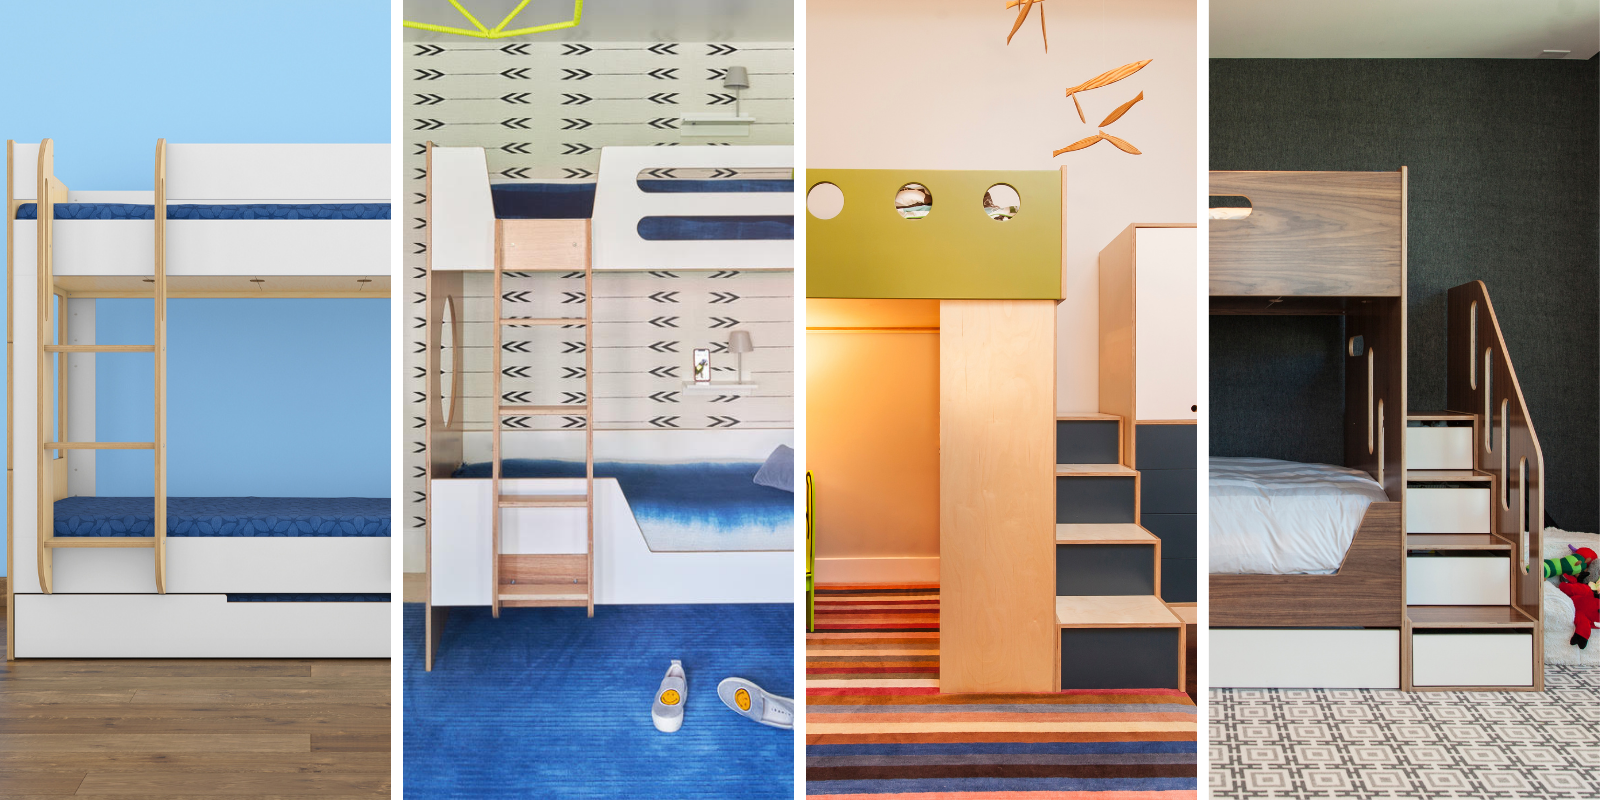 Collage: diverse children's beds in various room settings, showcasing creative designs and playful elements.